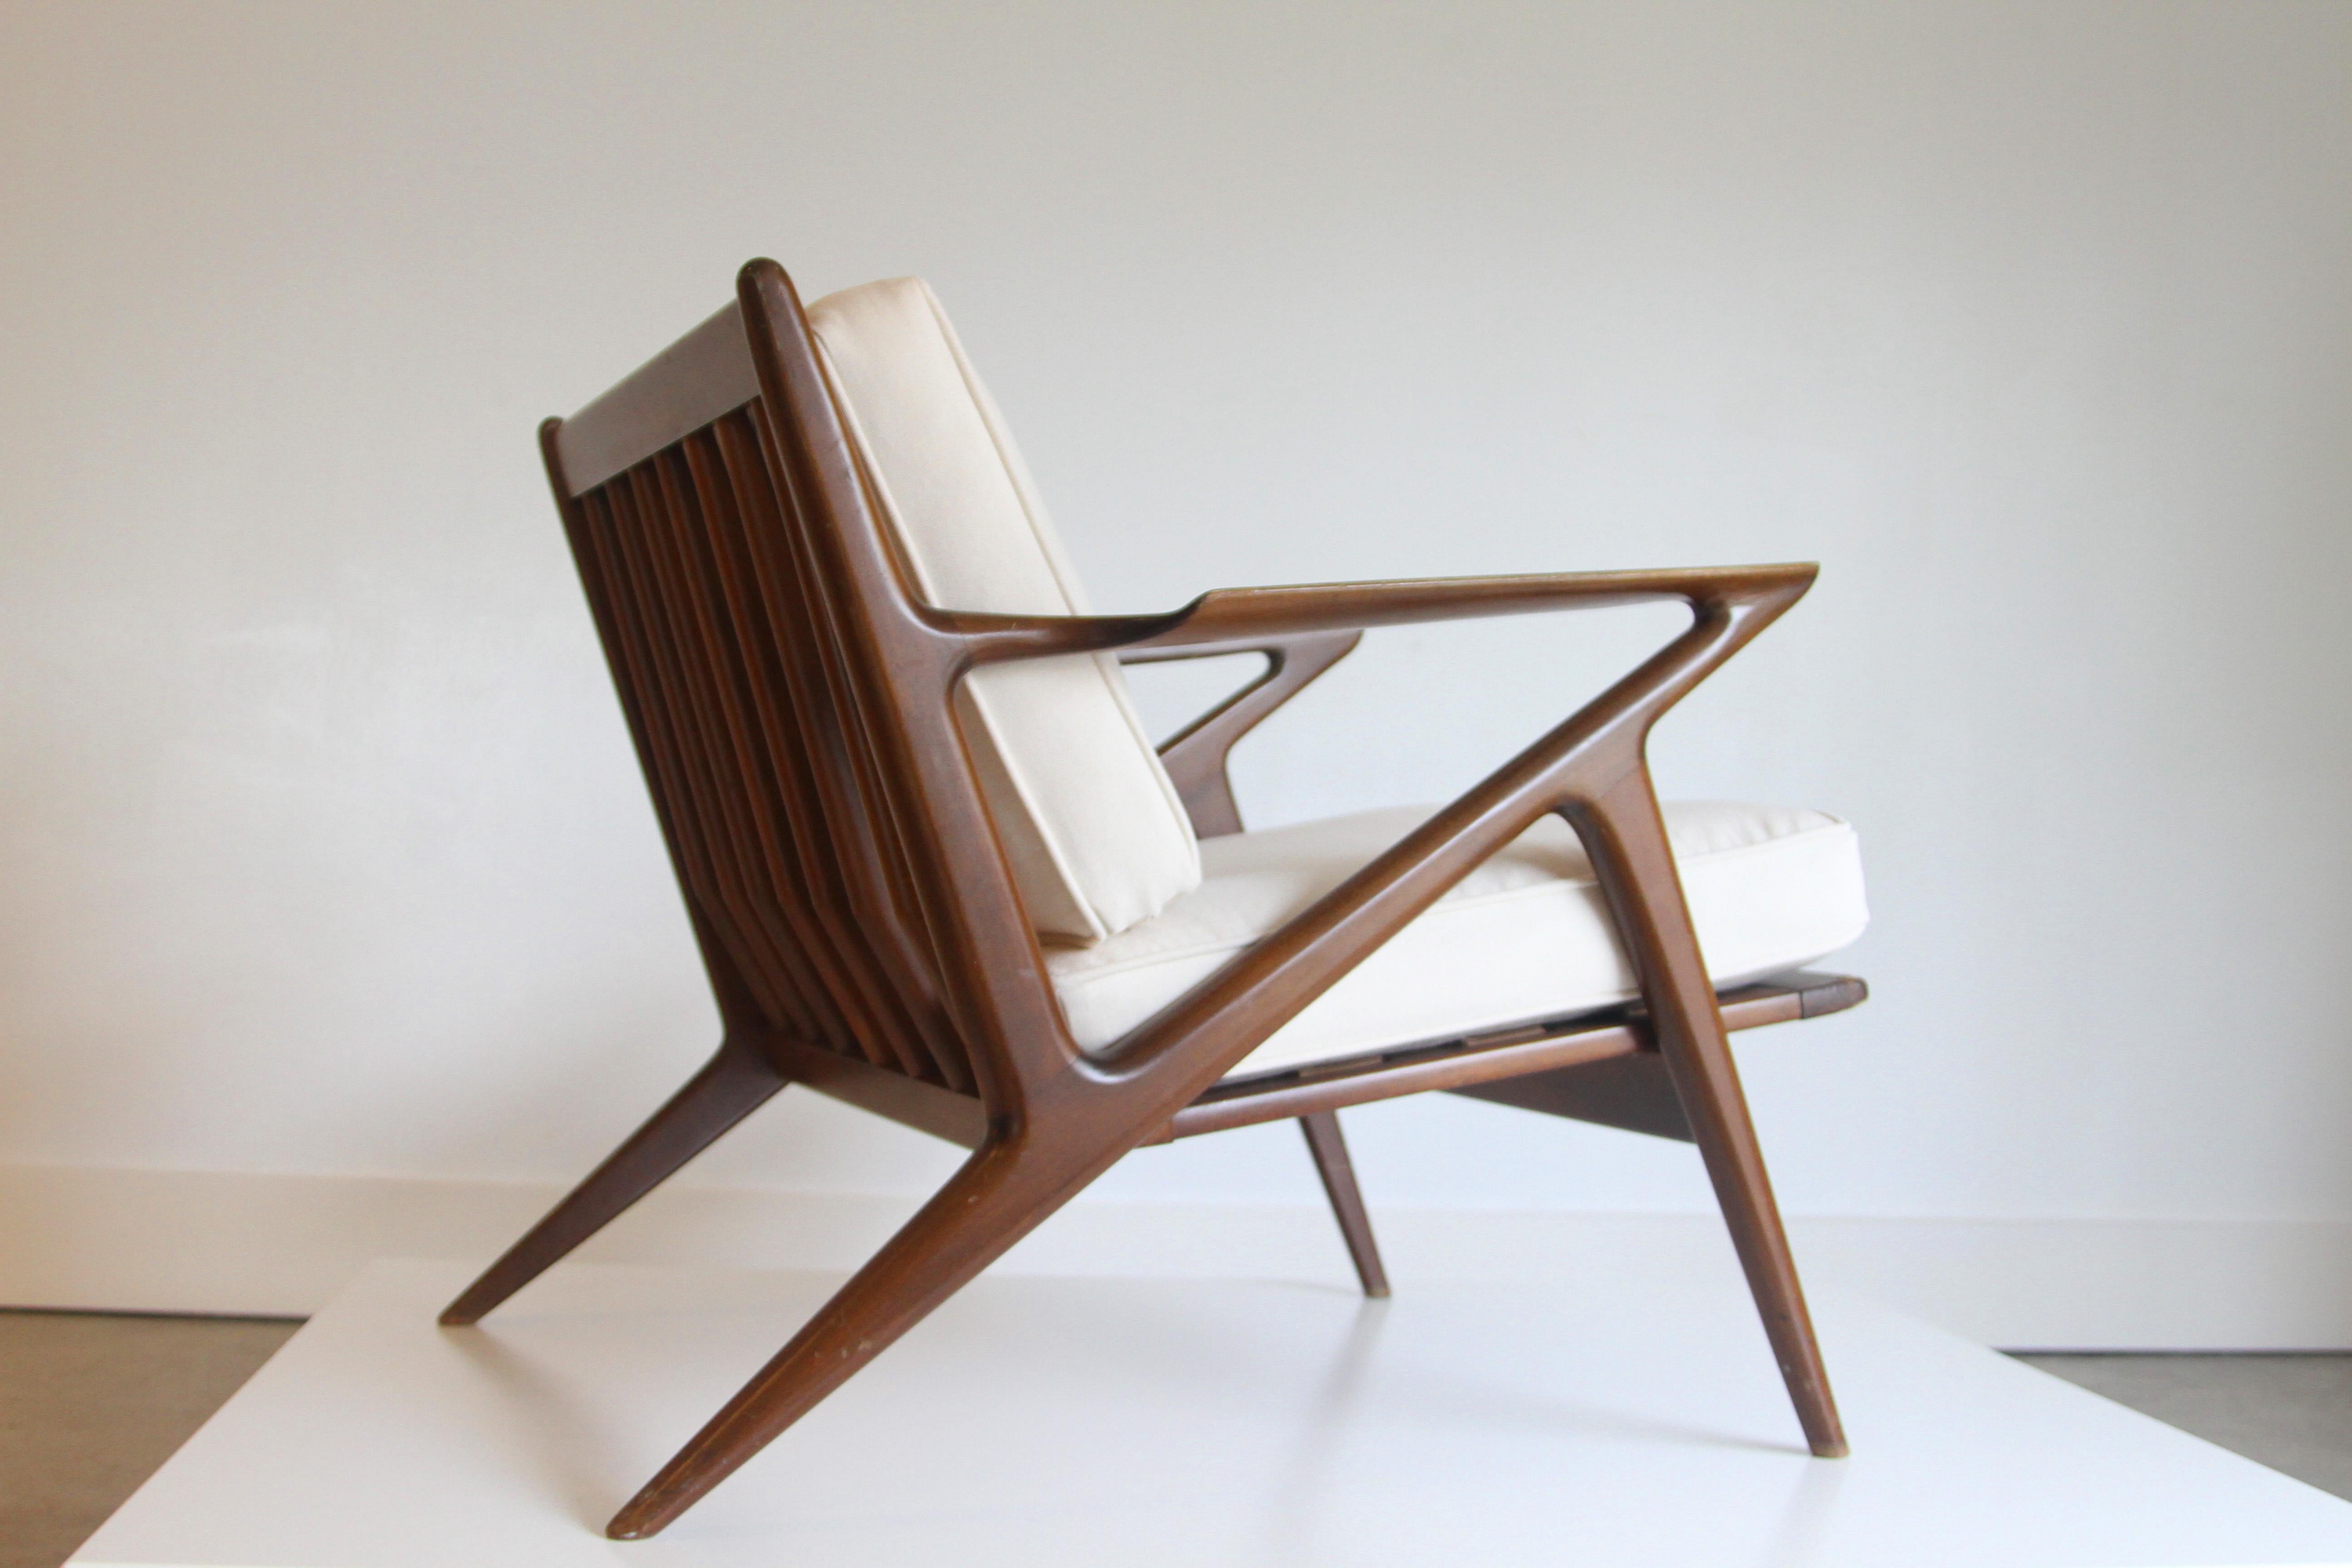 20th Century Pair of Mid-Century Modern Z Chair by Poul Jensen for Selig